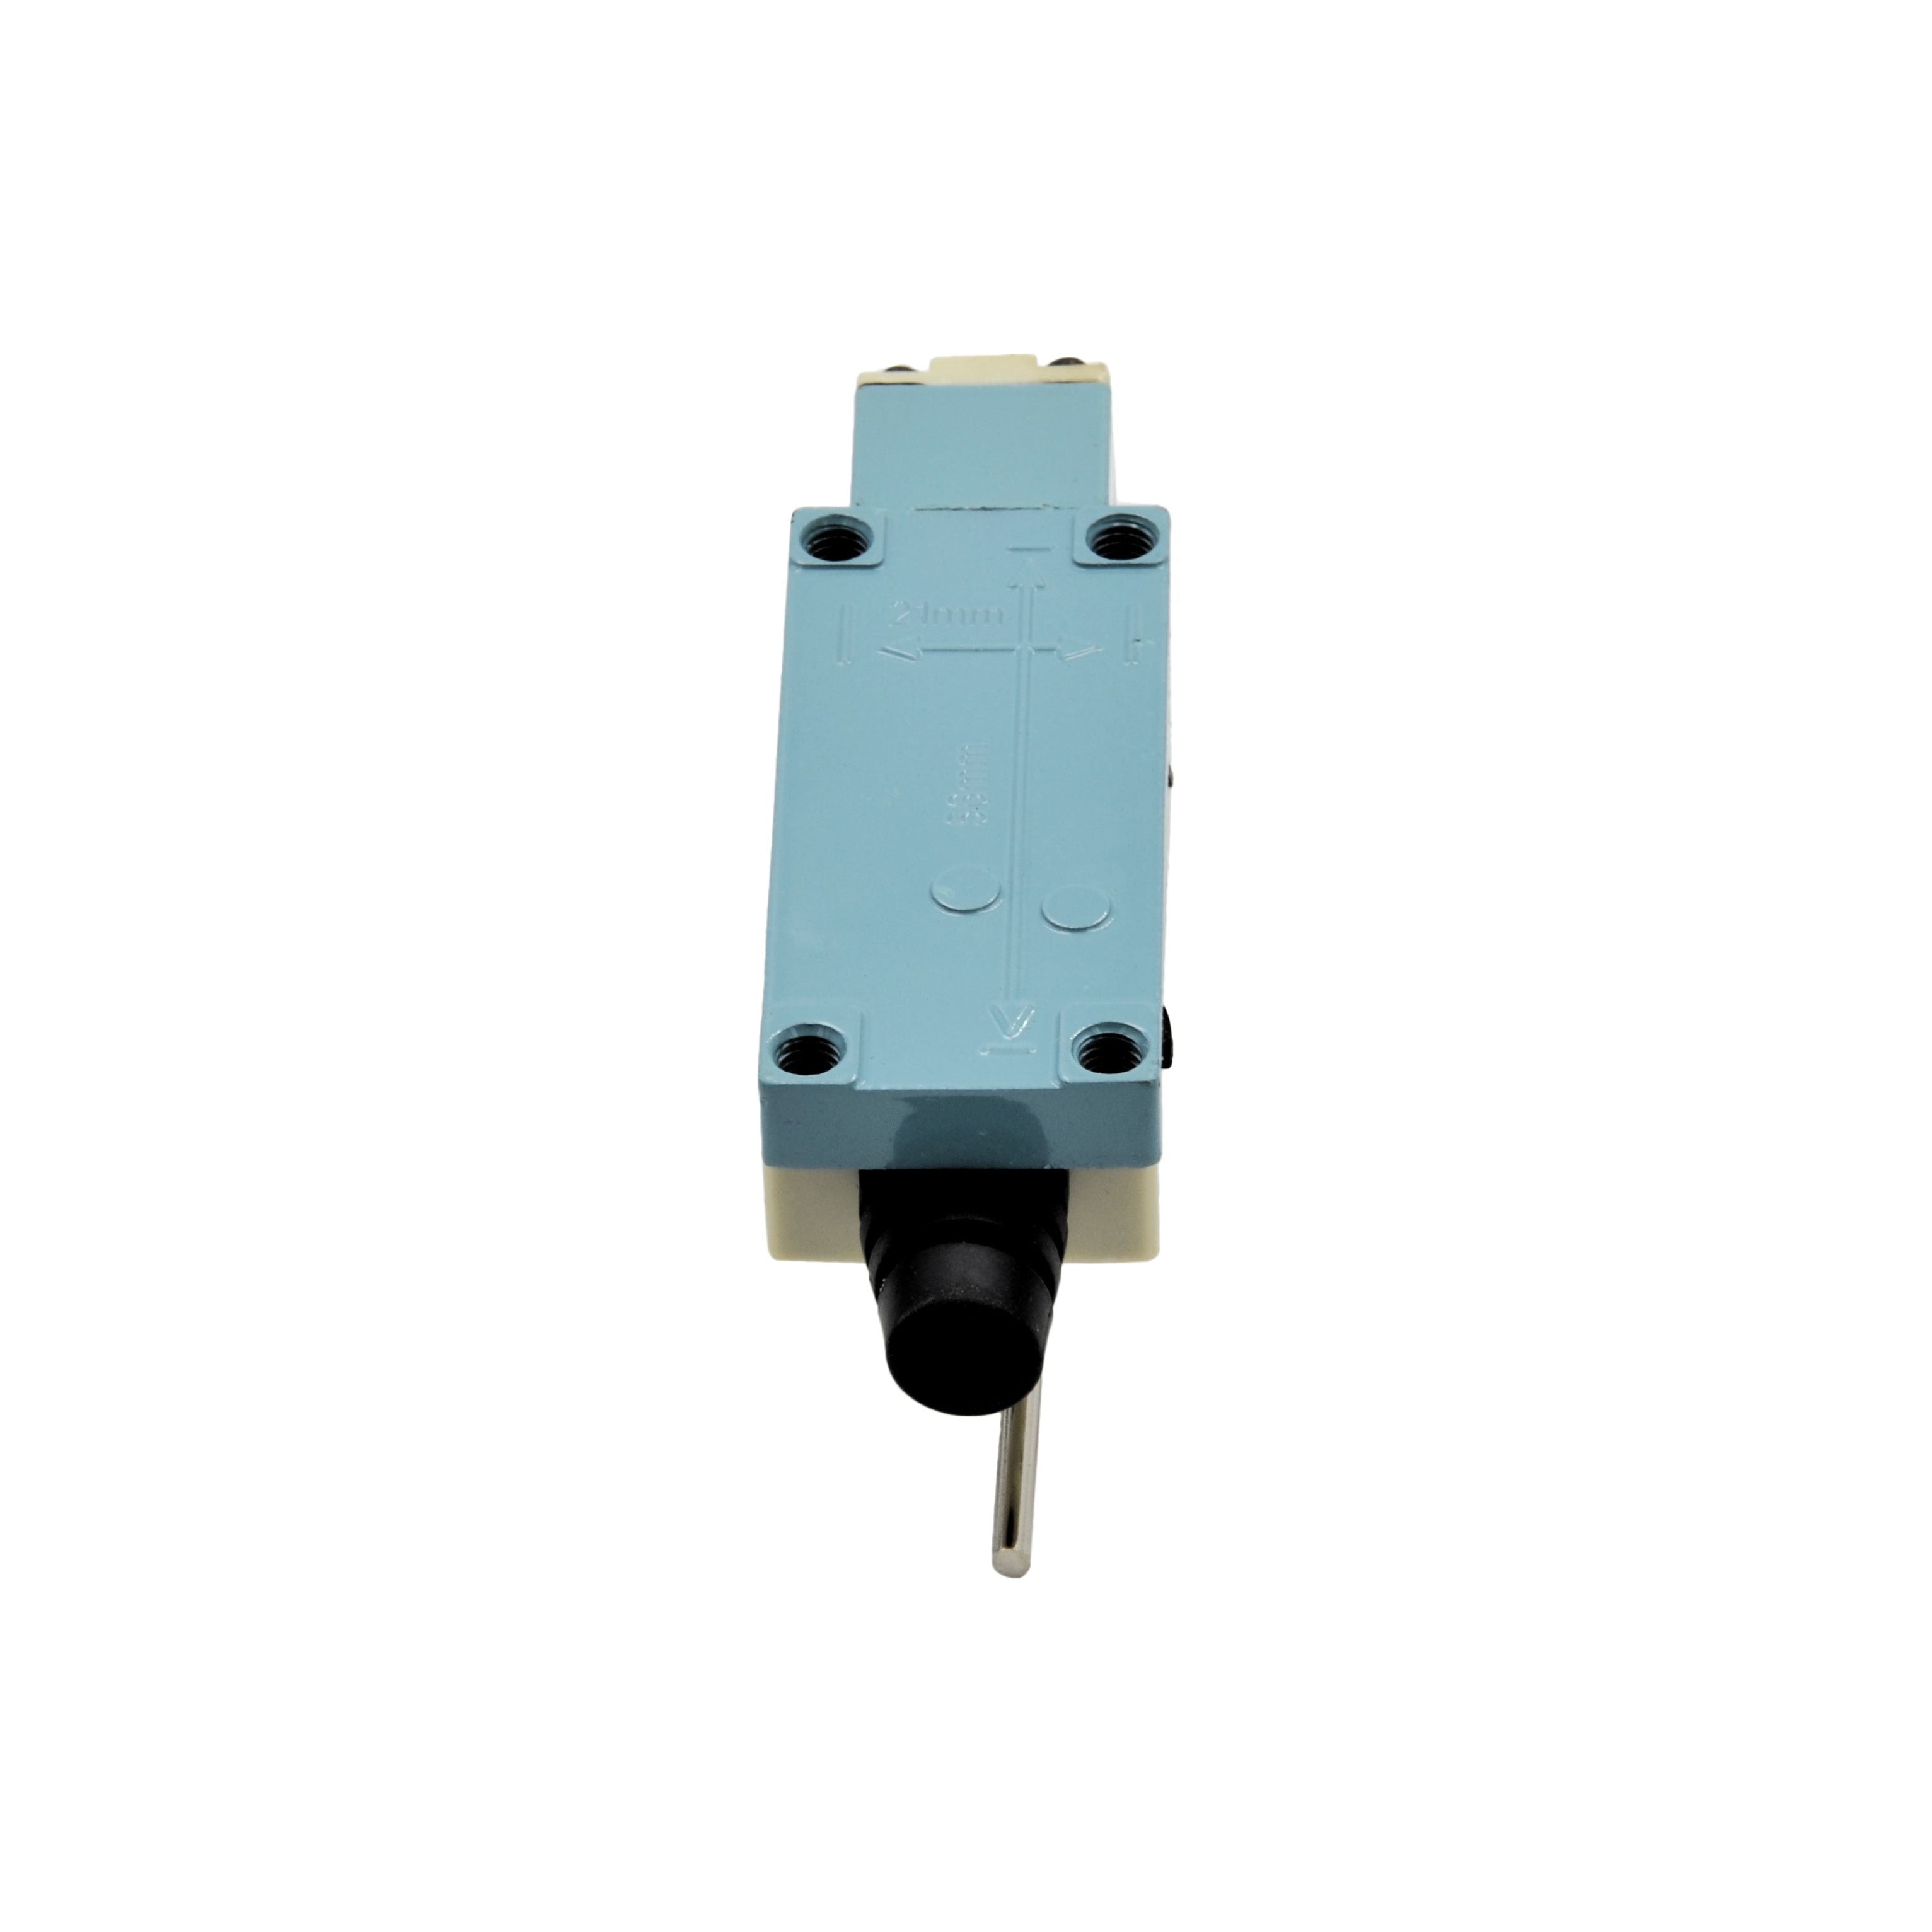 ME-8107 Adjustable Rod Lever Arm Momentary Limit Switch